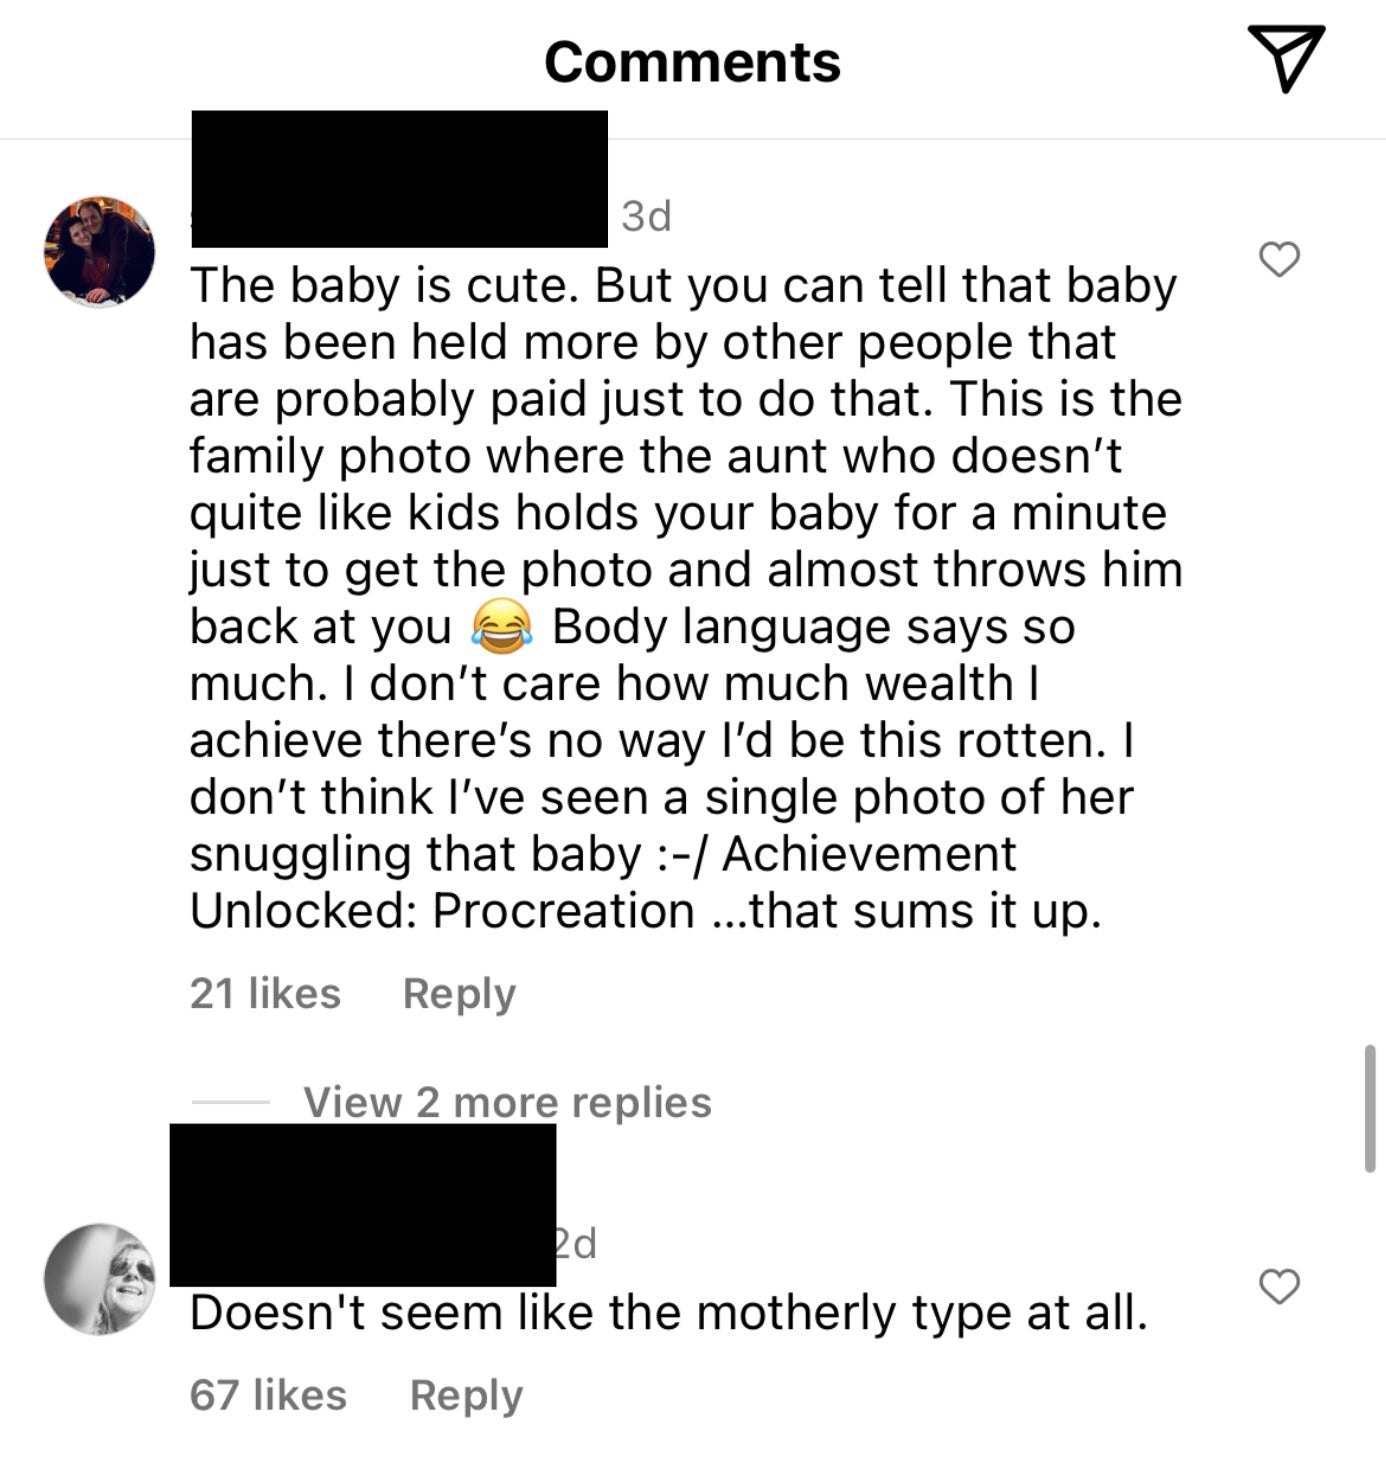 &quot;Doesn&#x27;t seem like the motherly type at all&quot;